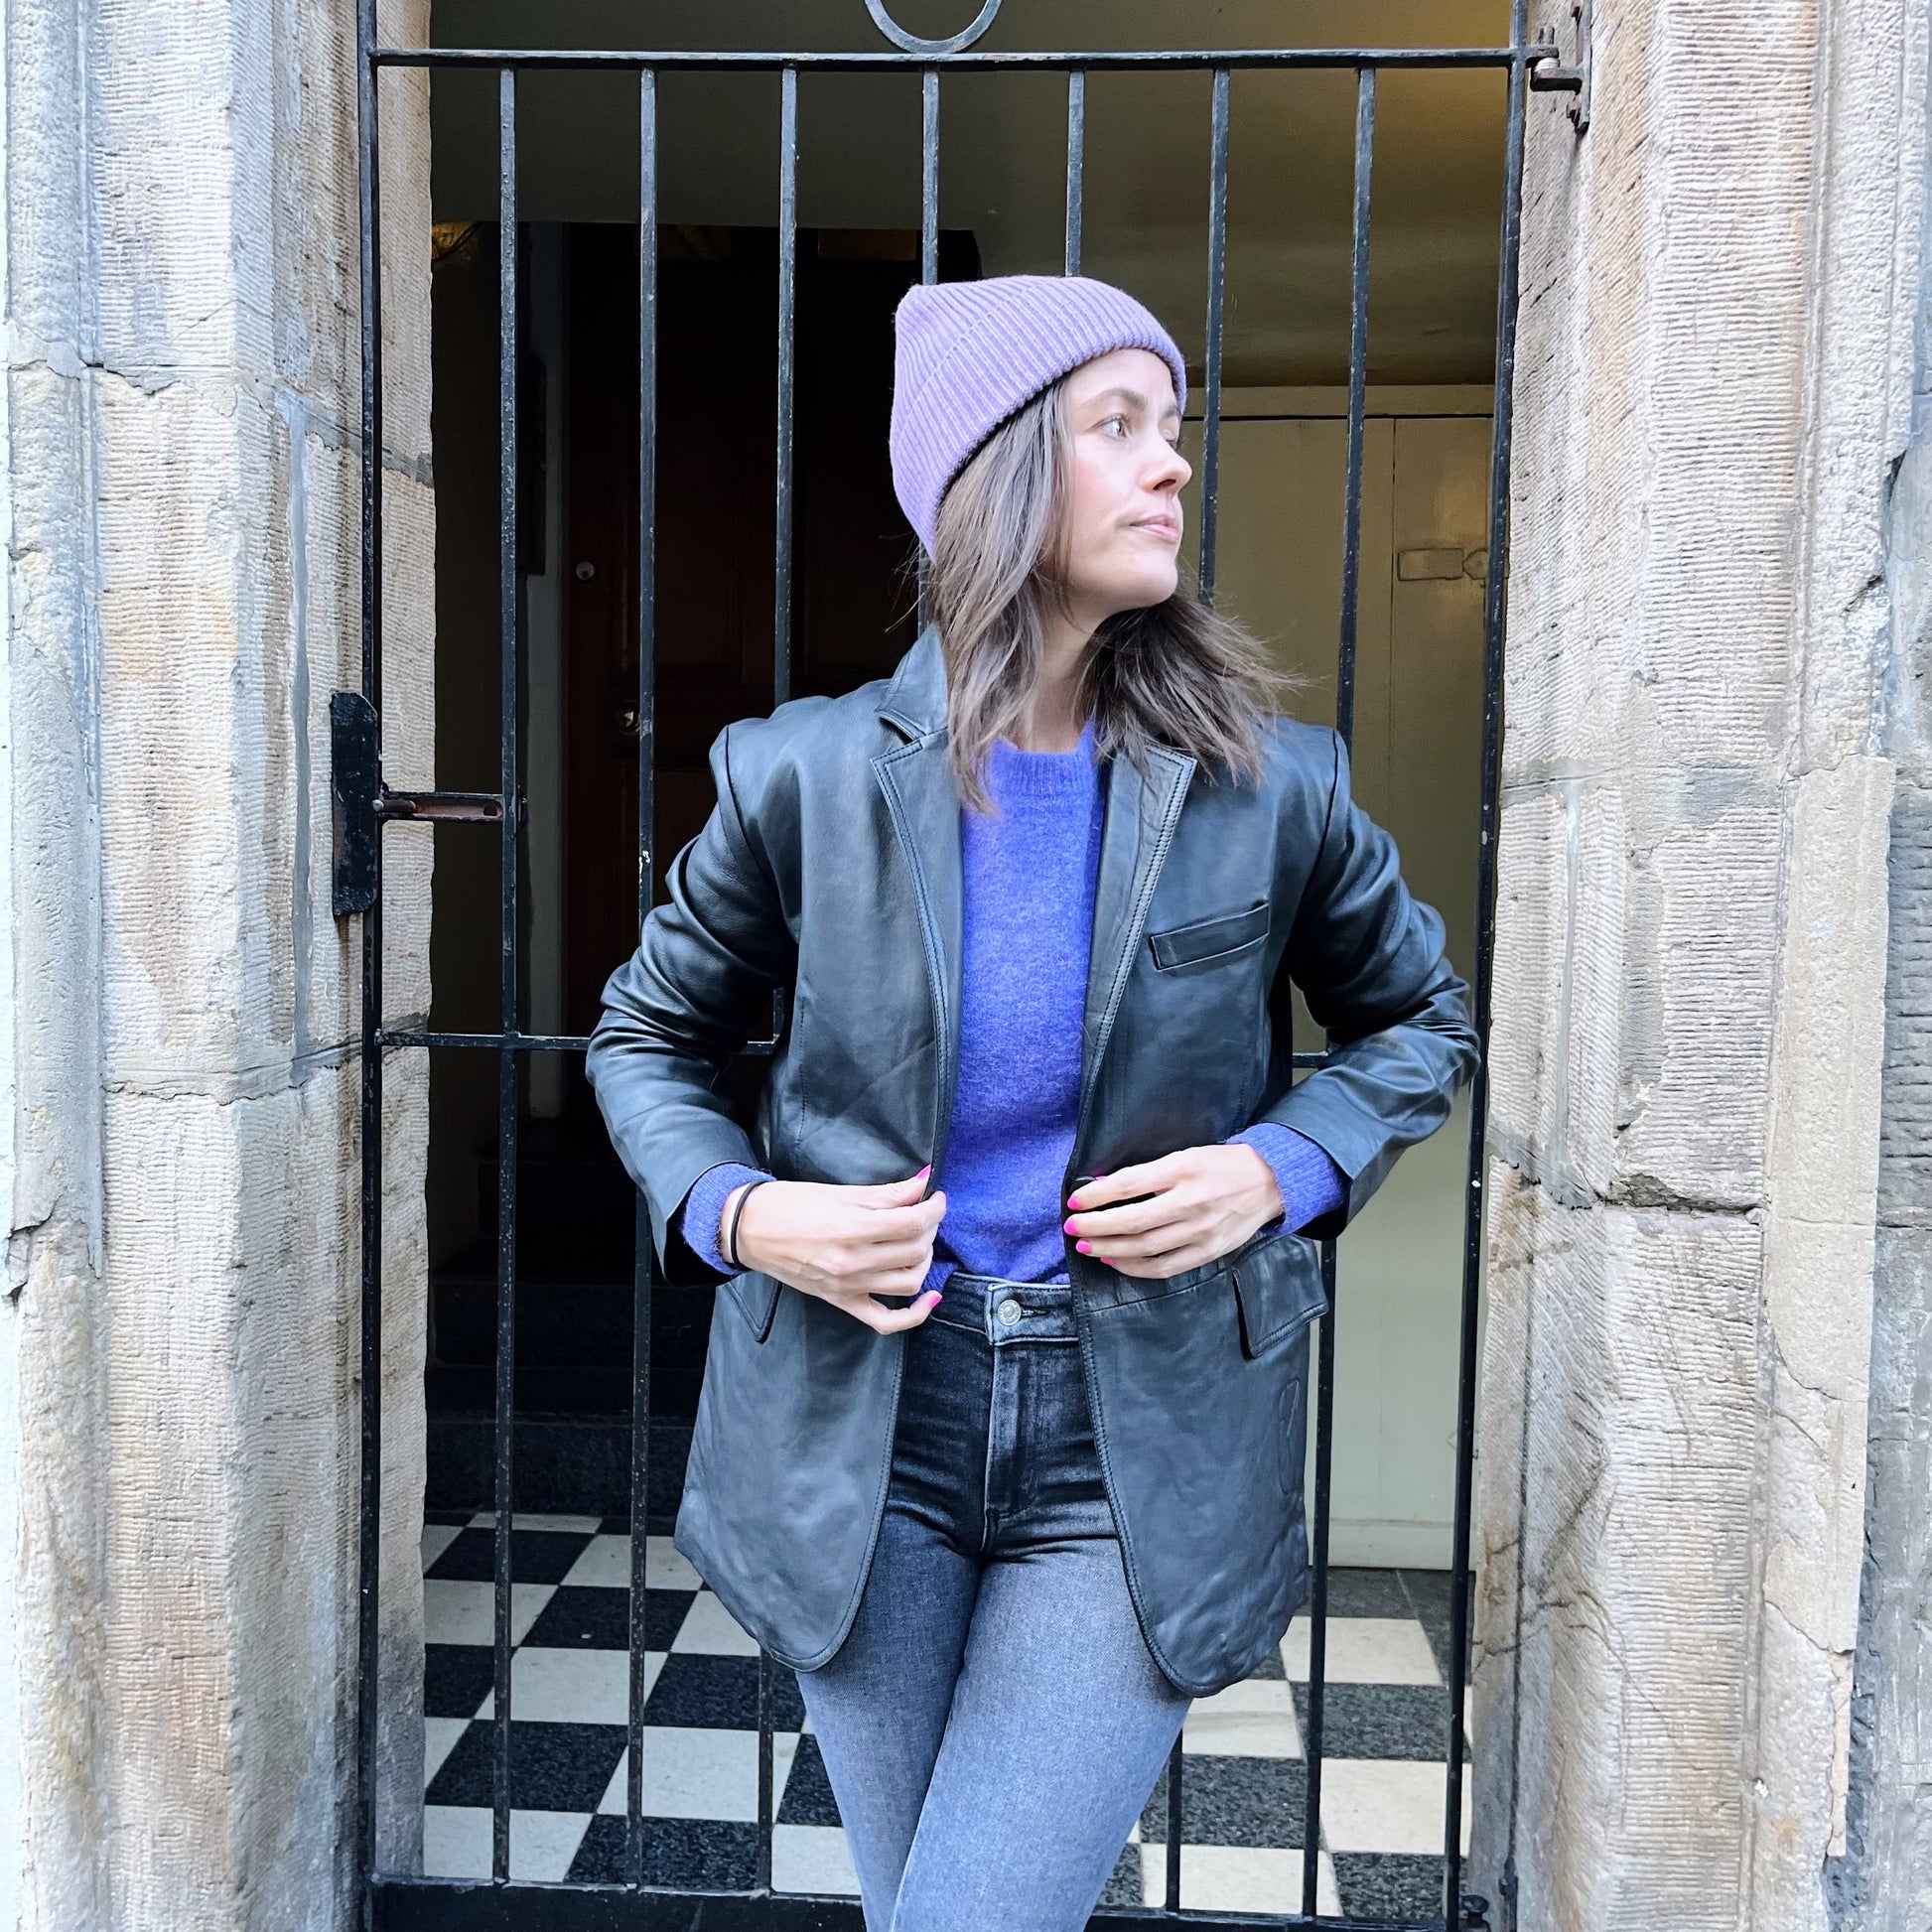 A woman sporting a MDK Celaya Classic Blazer - Black, fashioned in lambskin leather and topped with a stylish purple beanie.